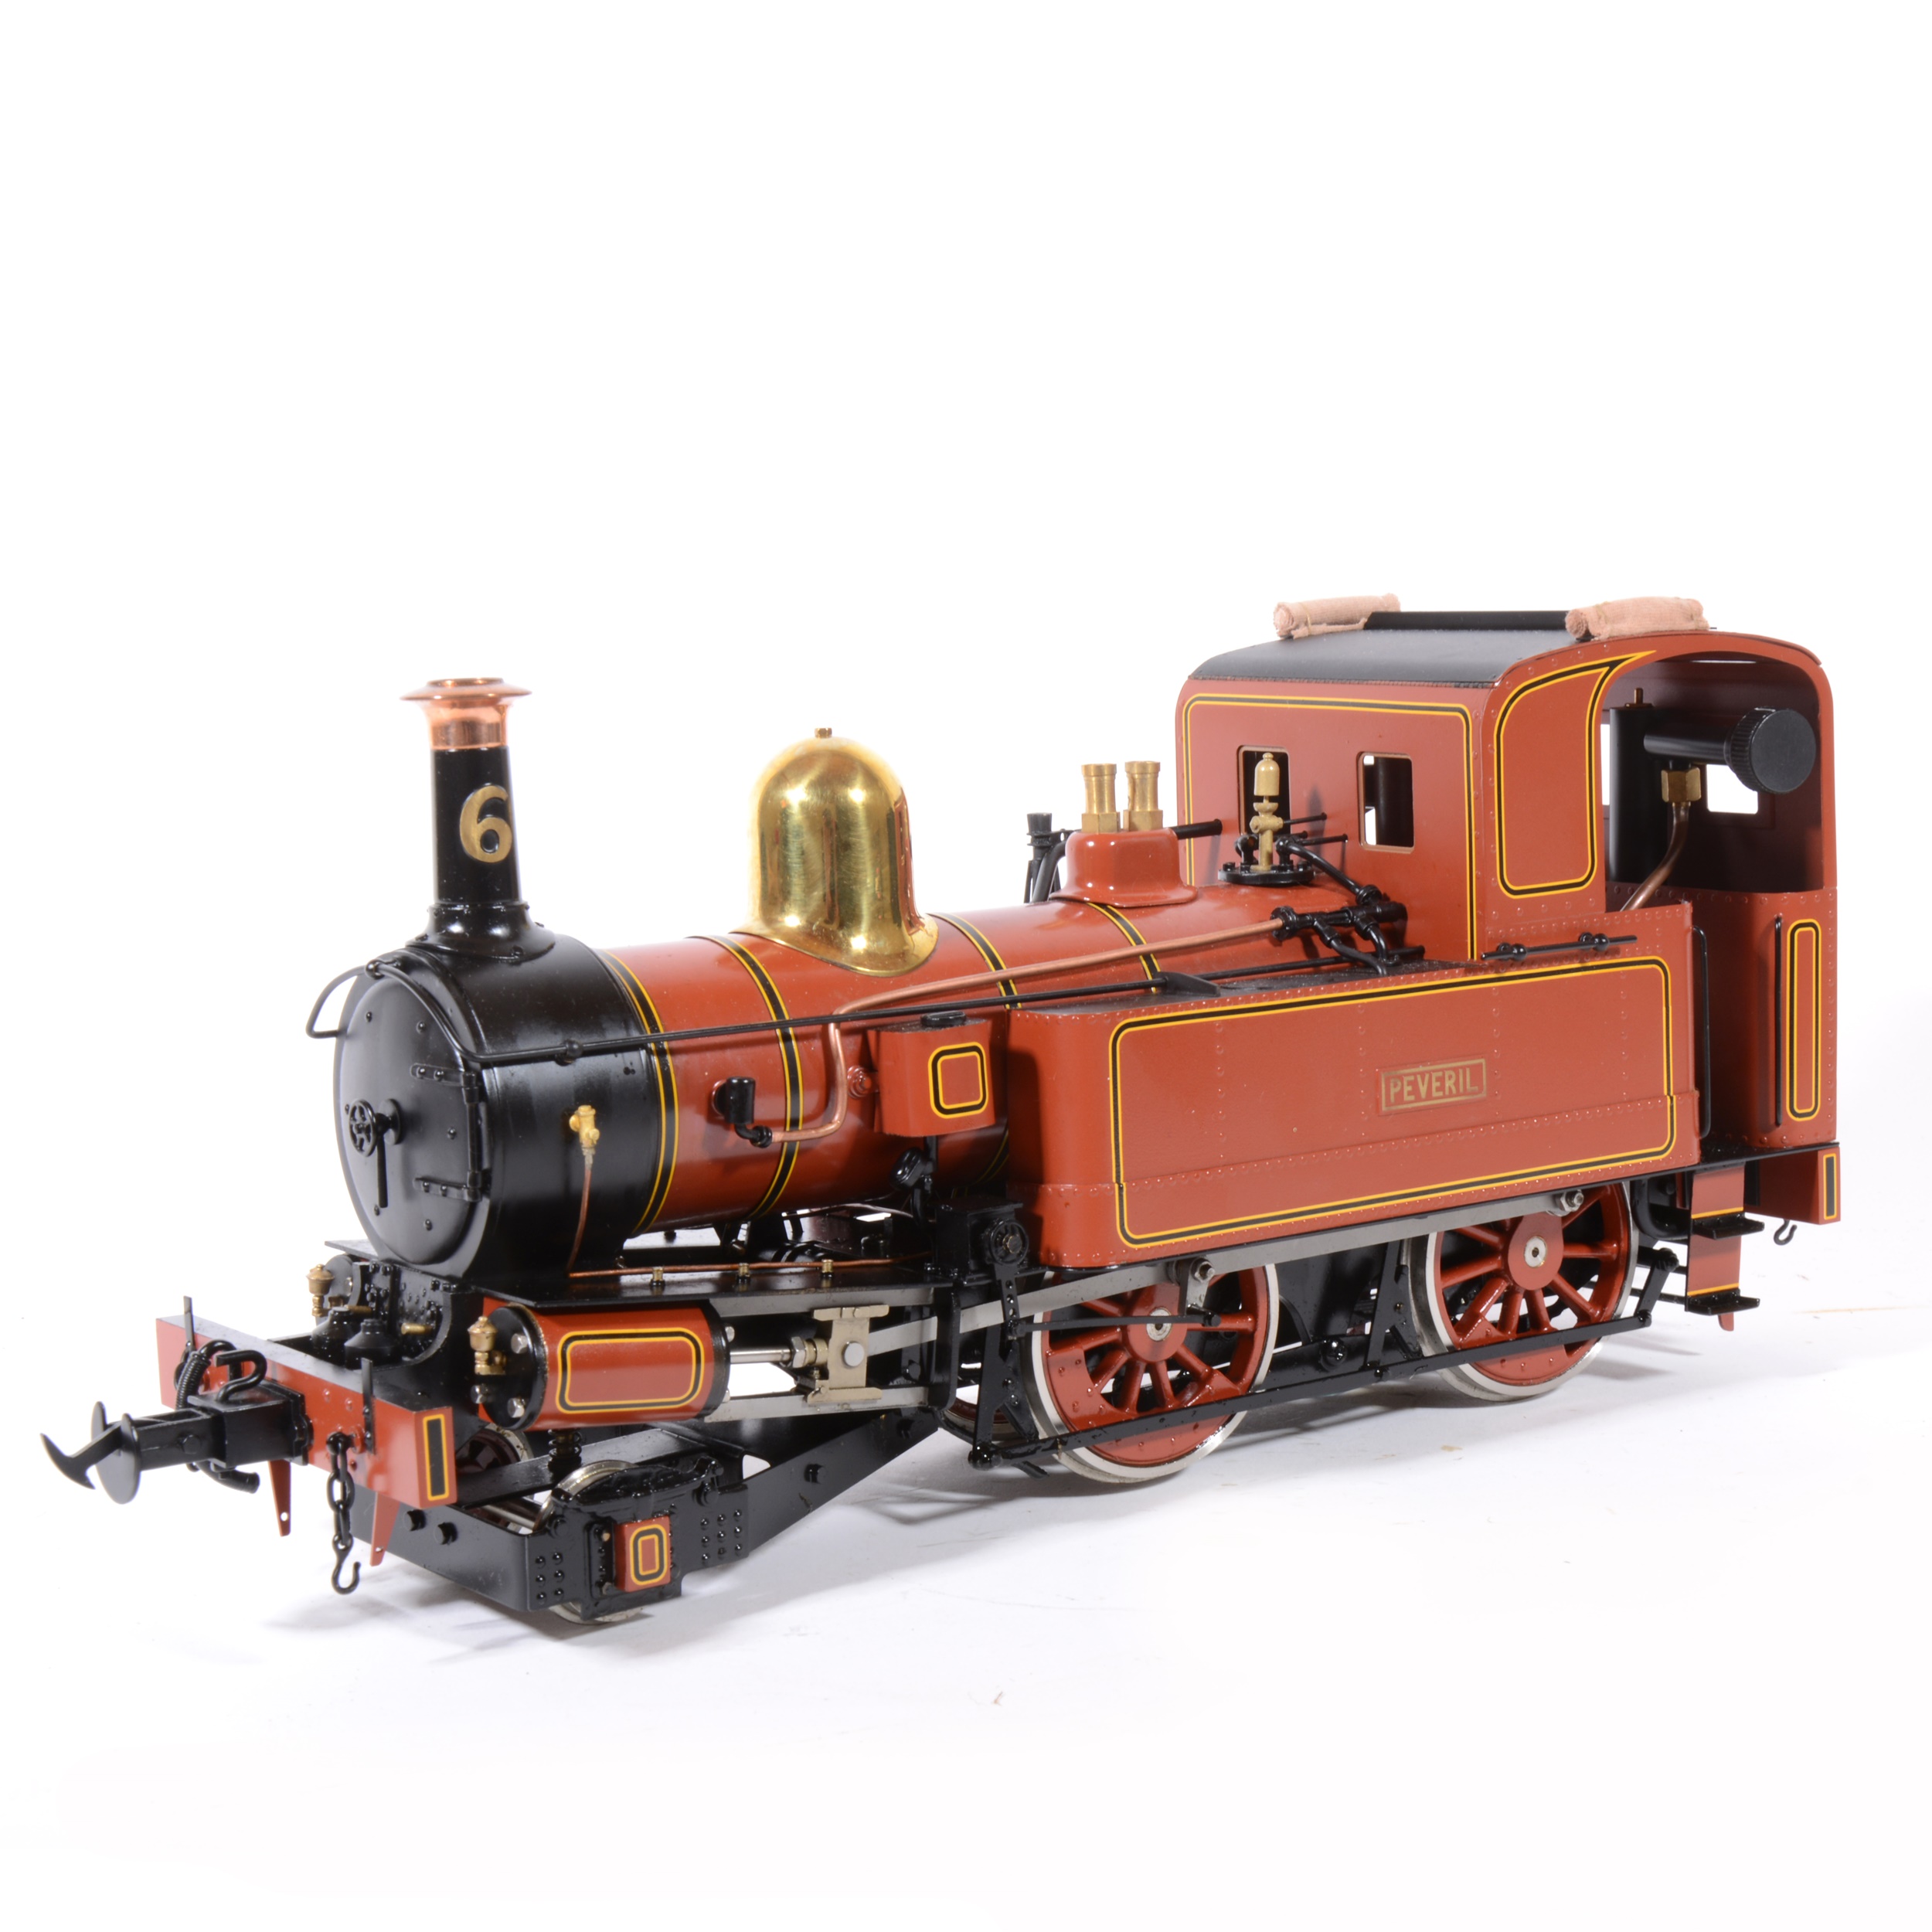 Accucraft live steam, gauge 1 / G scale, 45mm locomotive, Isle of Man 'Peveril', 2-4-0T, with - Image 2 of 2